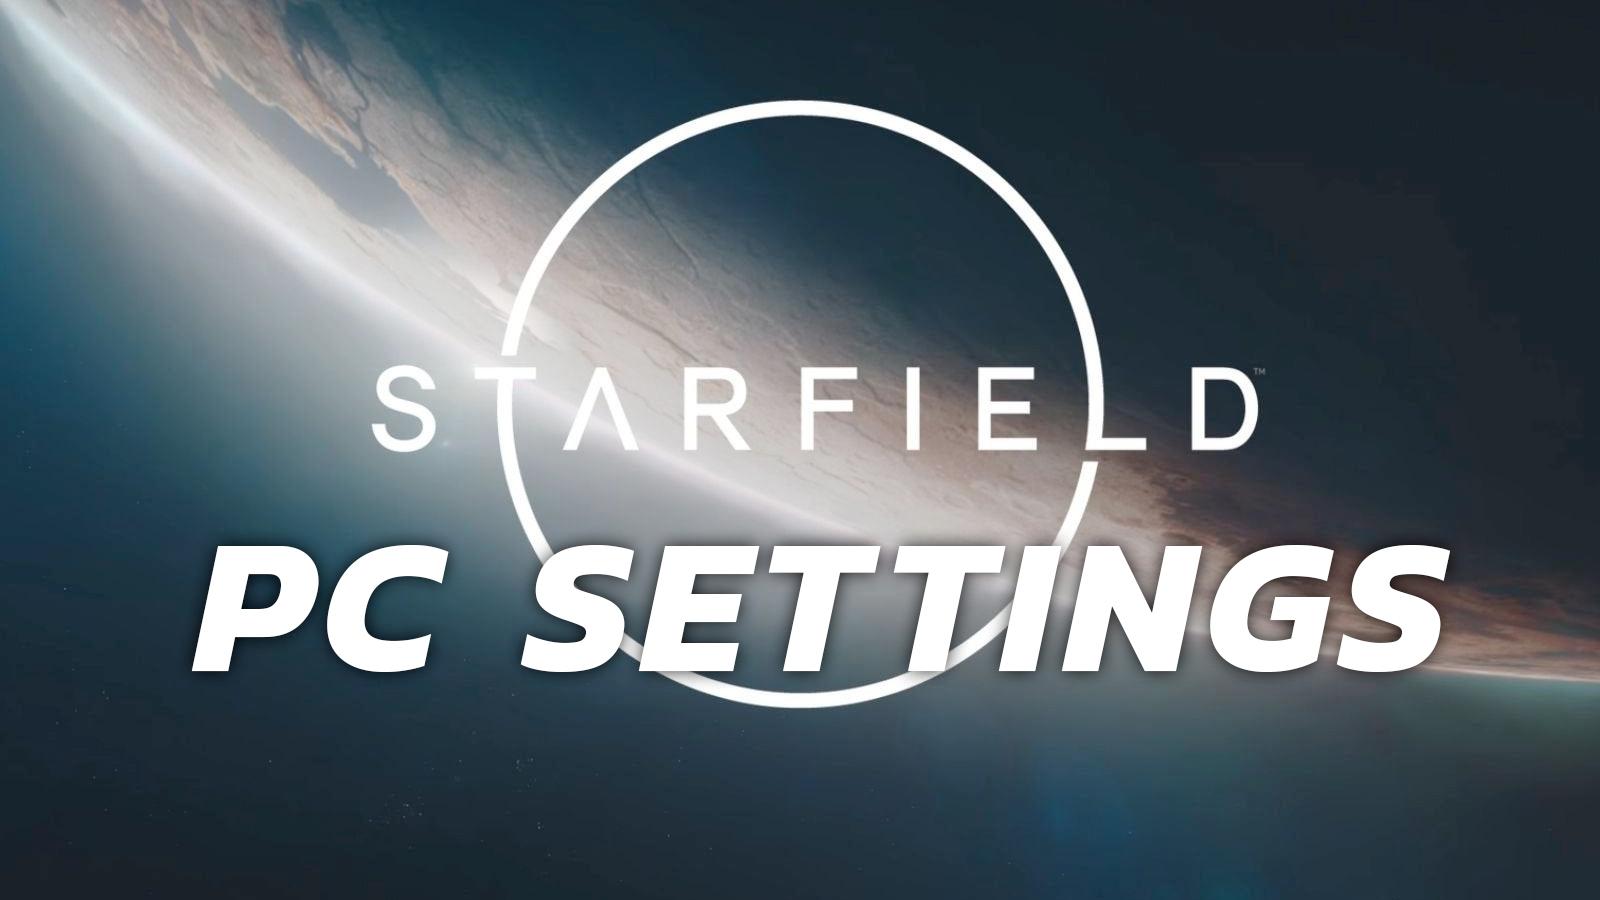 starfield logo with pc settings underneath